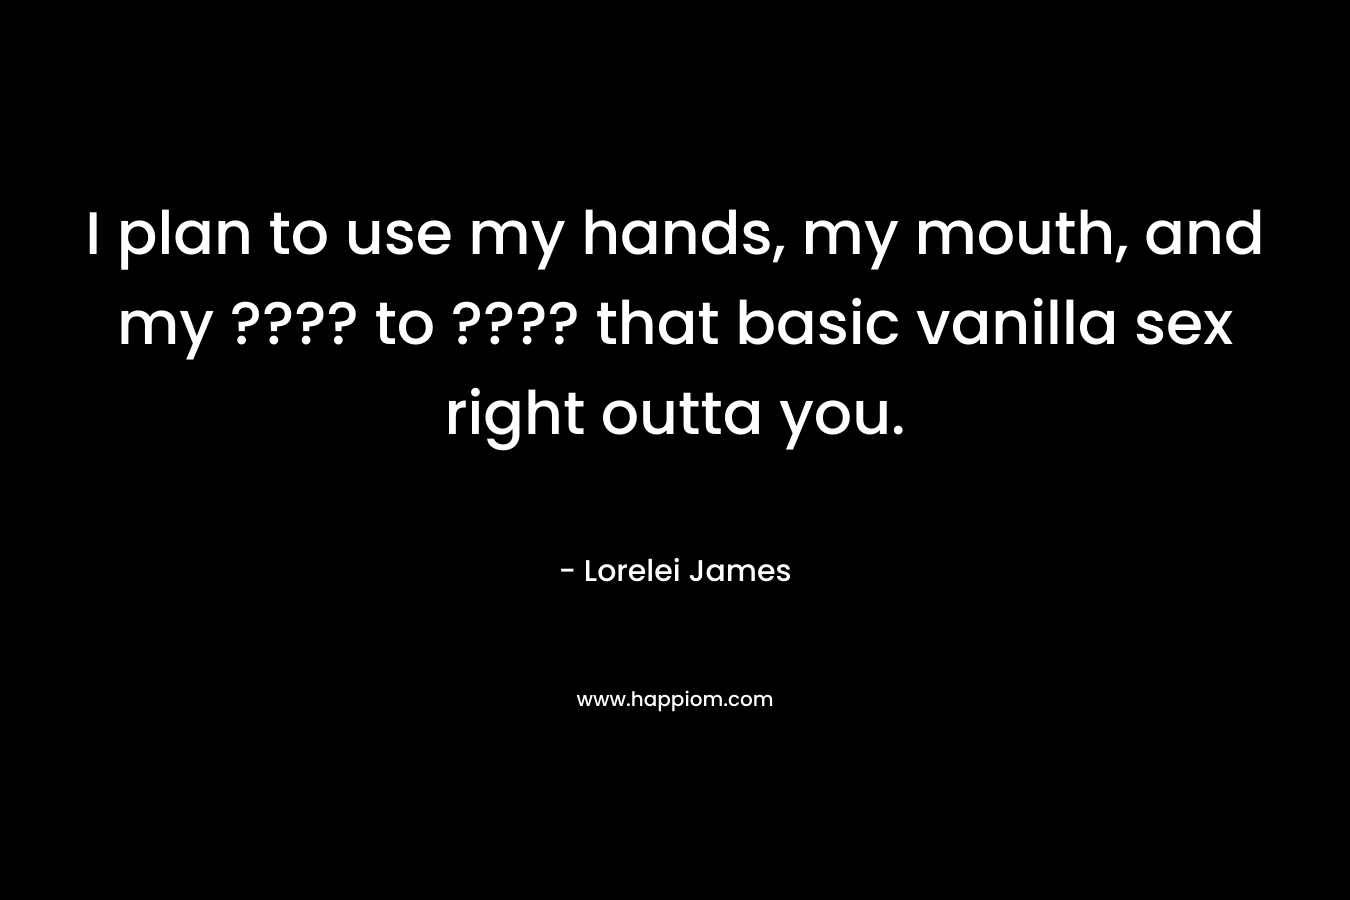 I plan to use my hands, my mouth, and my ???? to ???? that basic vanilla sex right outta you. – Lorelei James